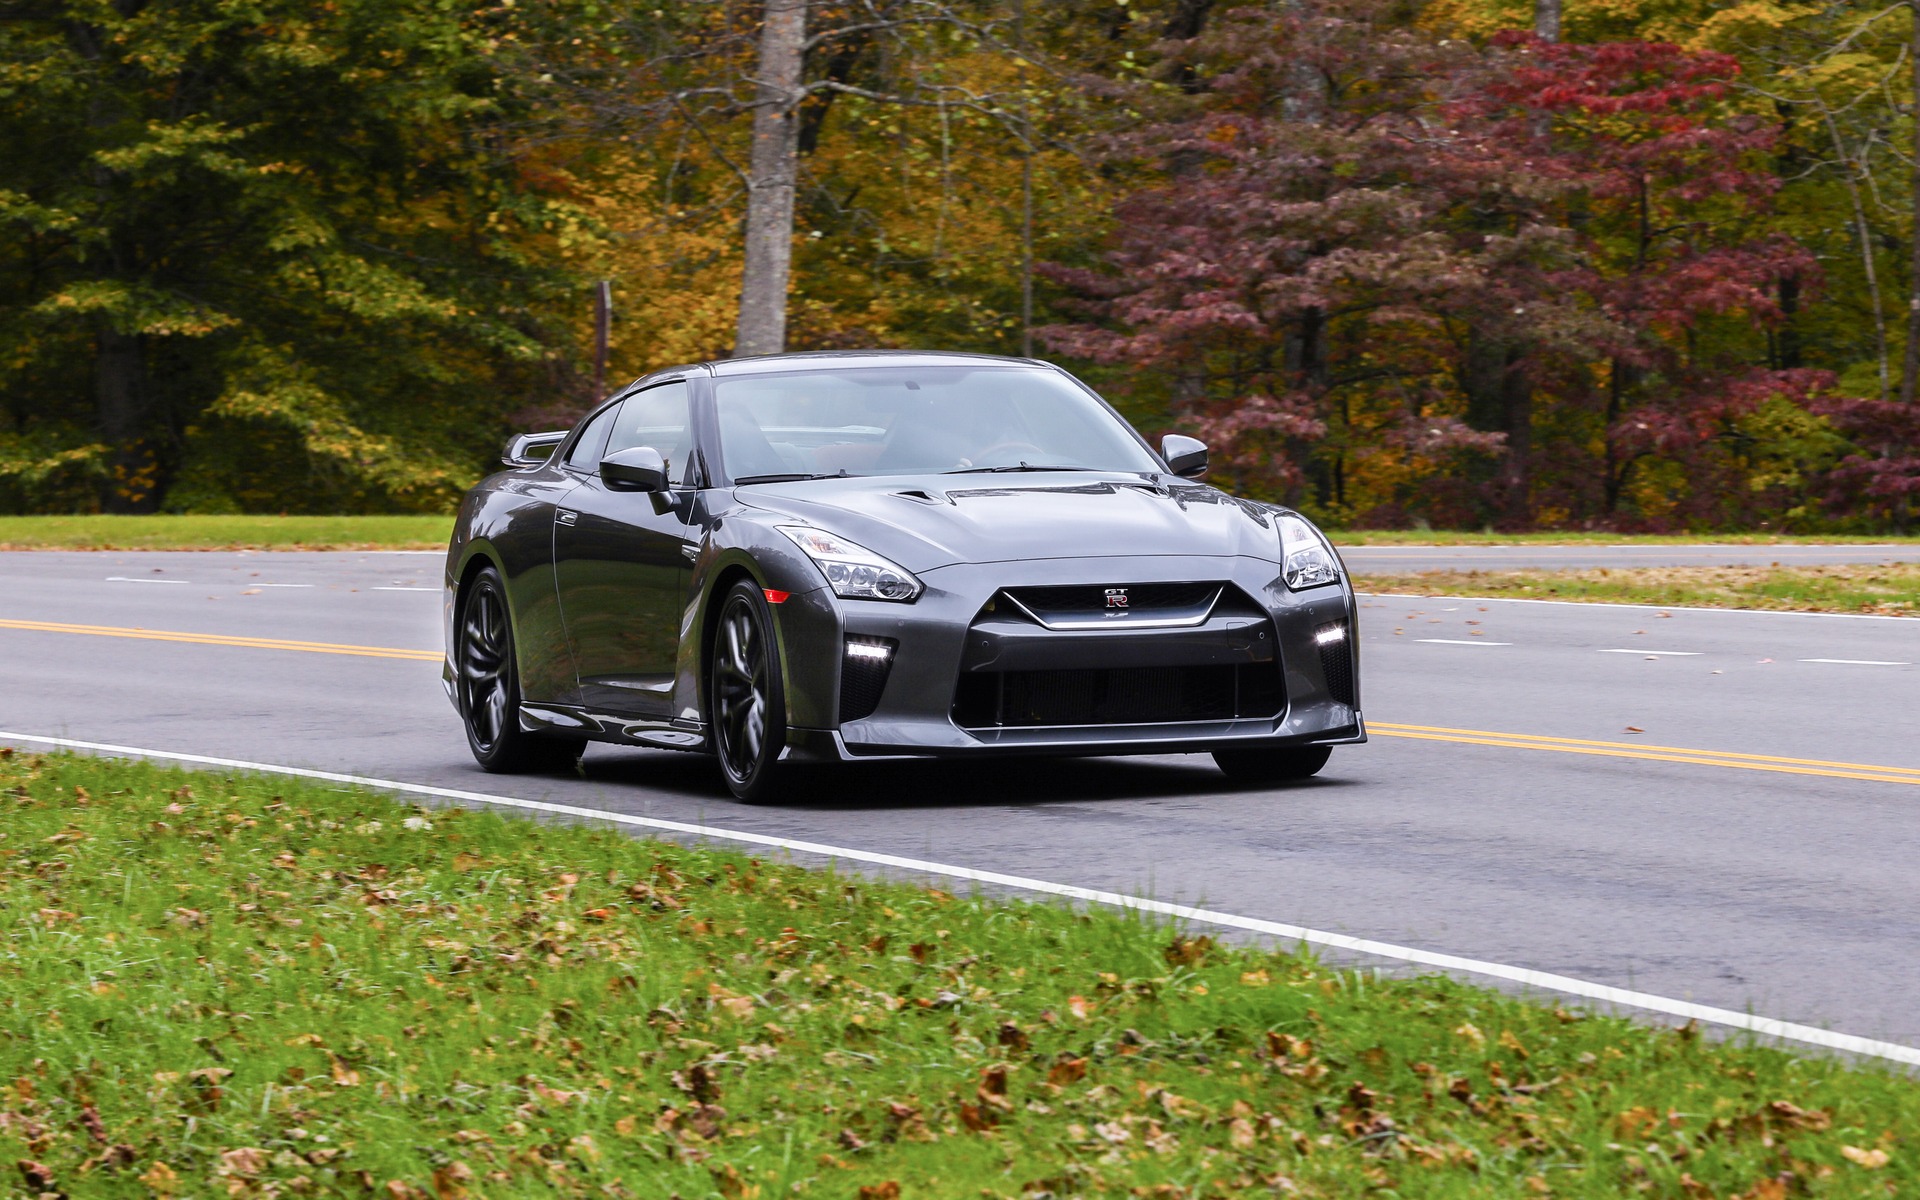 2019 Nissan Gt R News Reviews Picture Galleries And Videos The Car Guide